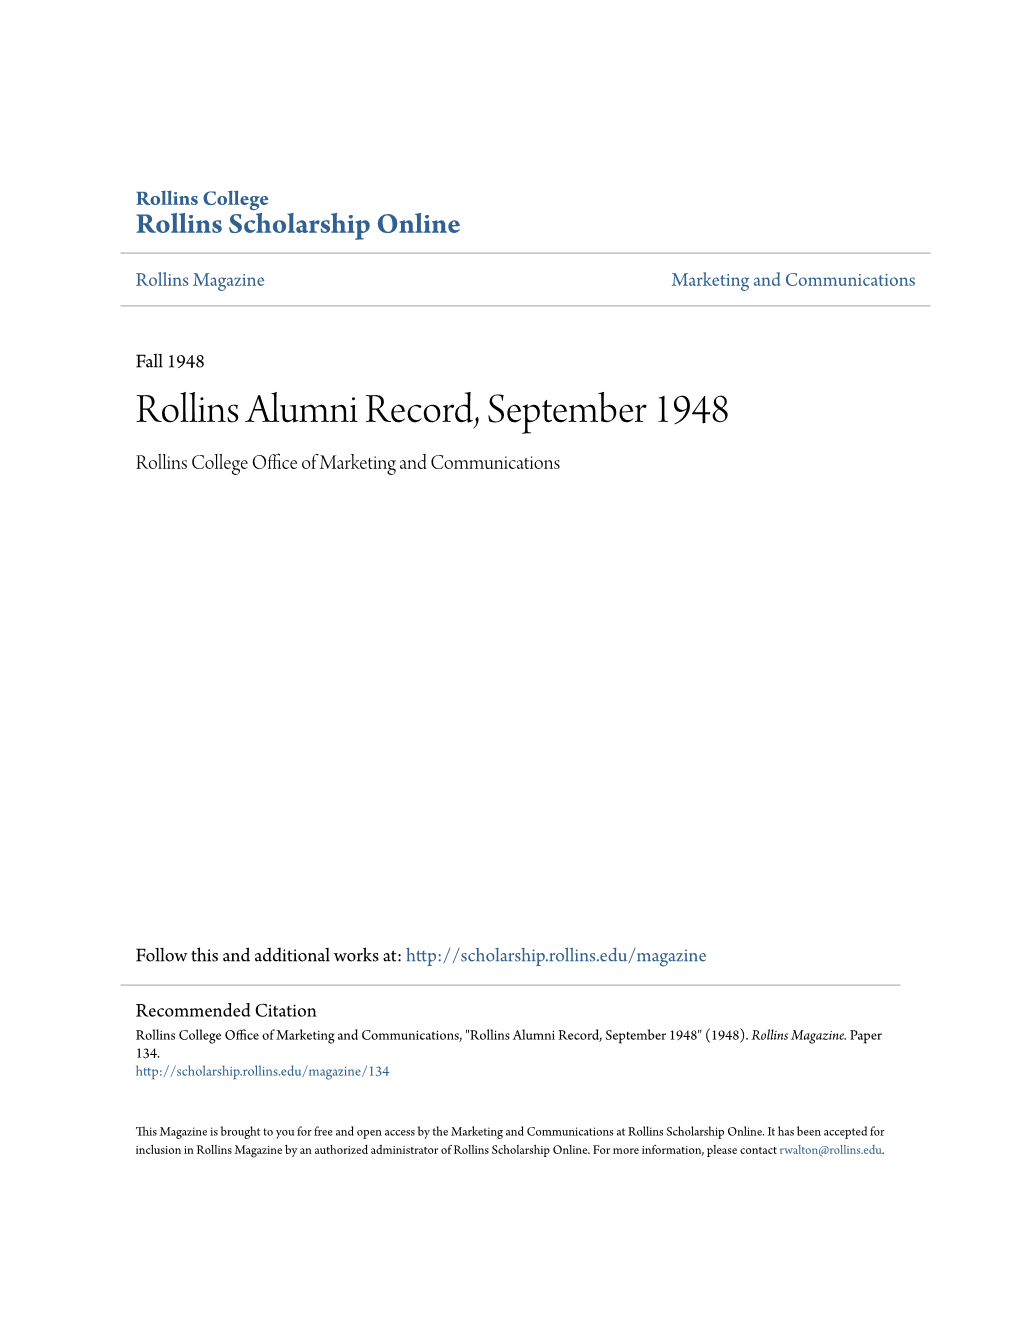 Rollins Alumni Record, September 1948 Rollins College Office Ofa M Rketing and Communications